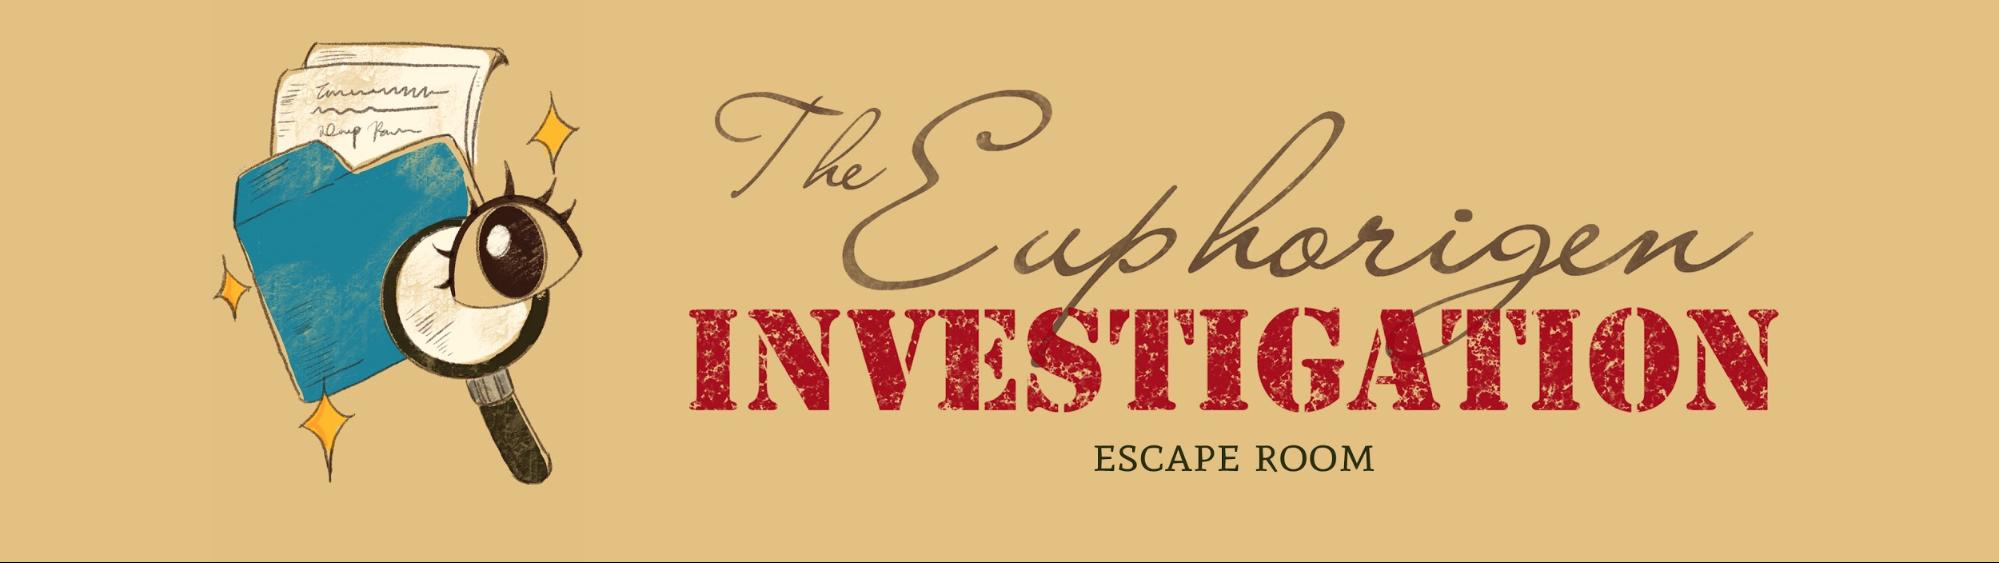 Red and black text that reads "The Euphorigen Investigation Escape Room" on a yellow background. To the left of the text are several icons, including a magnifying glass, an eye, and a blue file folder holding papers.